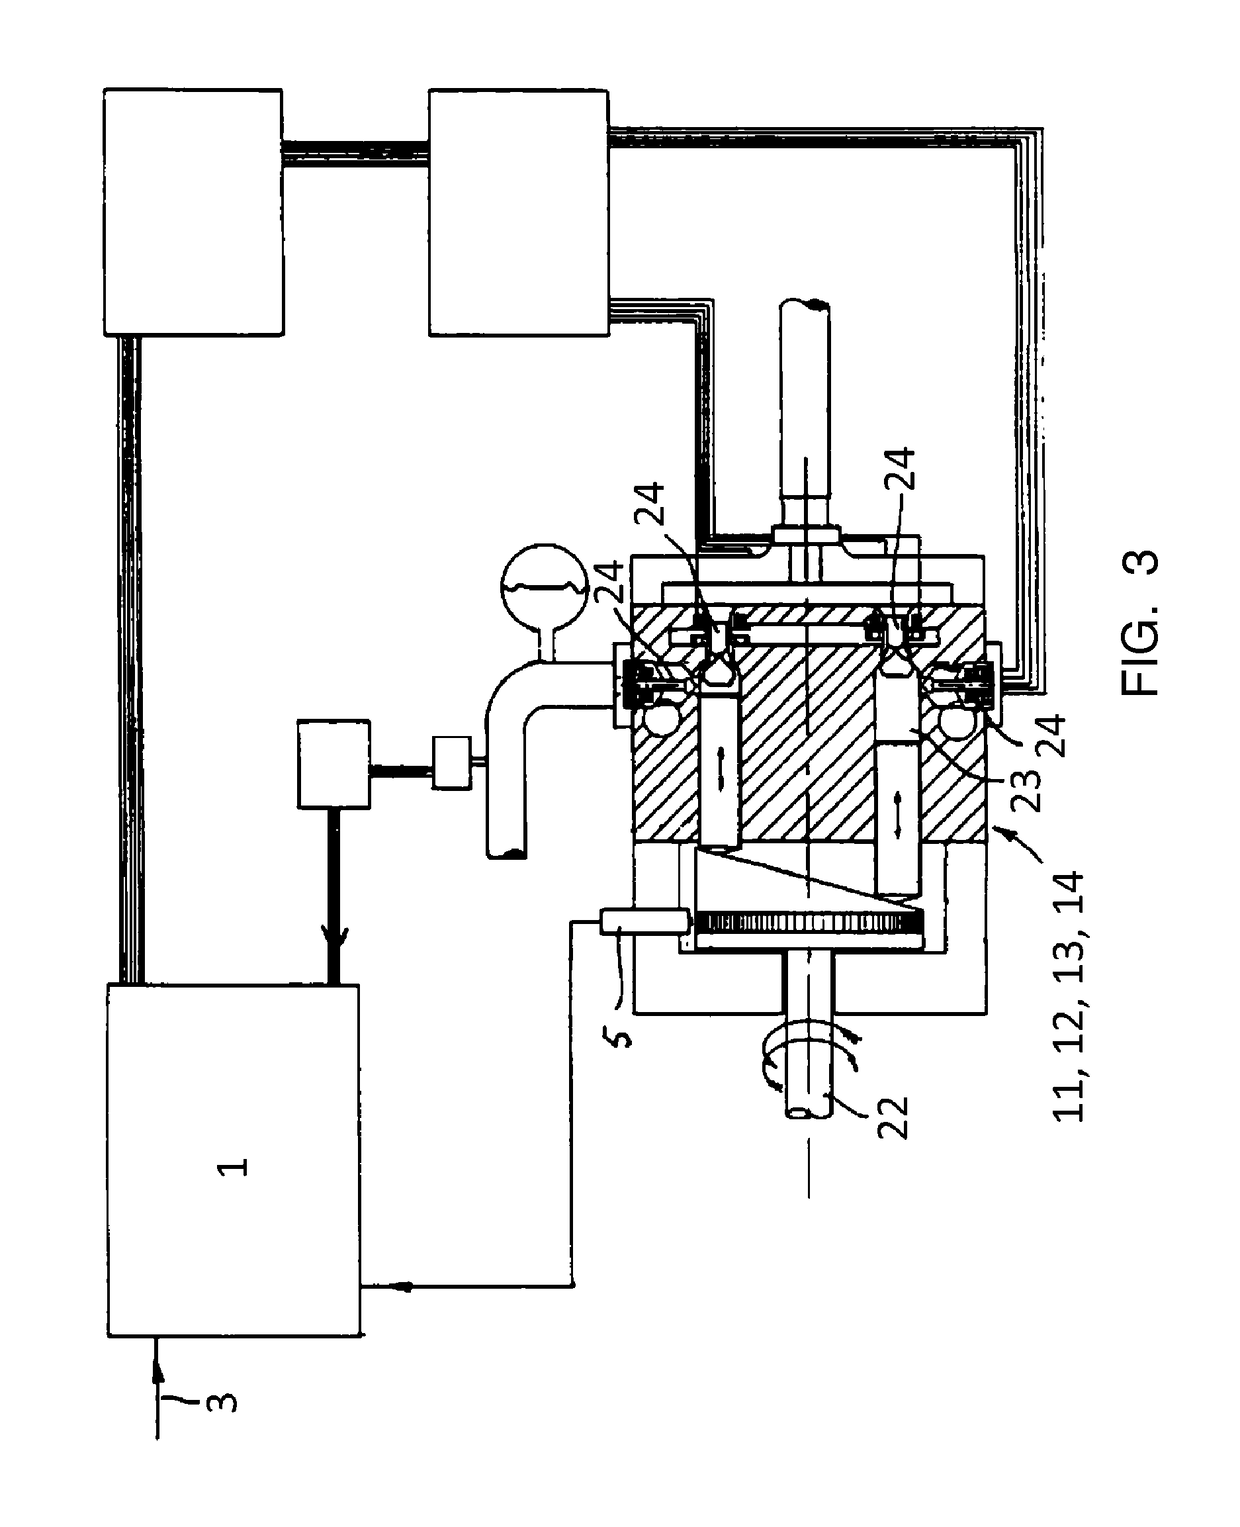 Fluid power distribution and control system